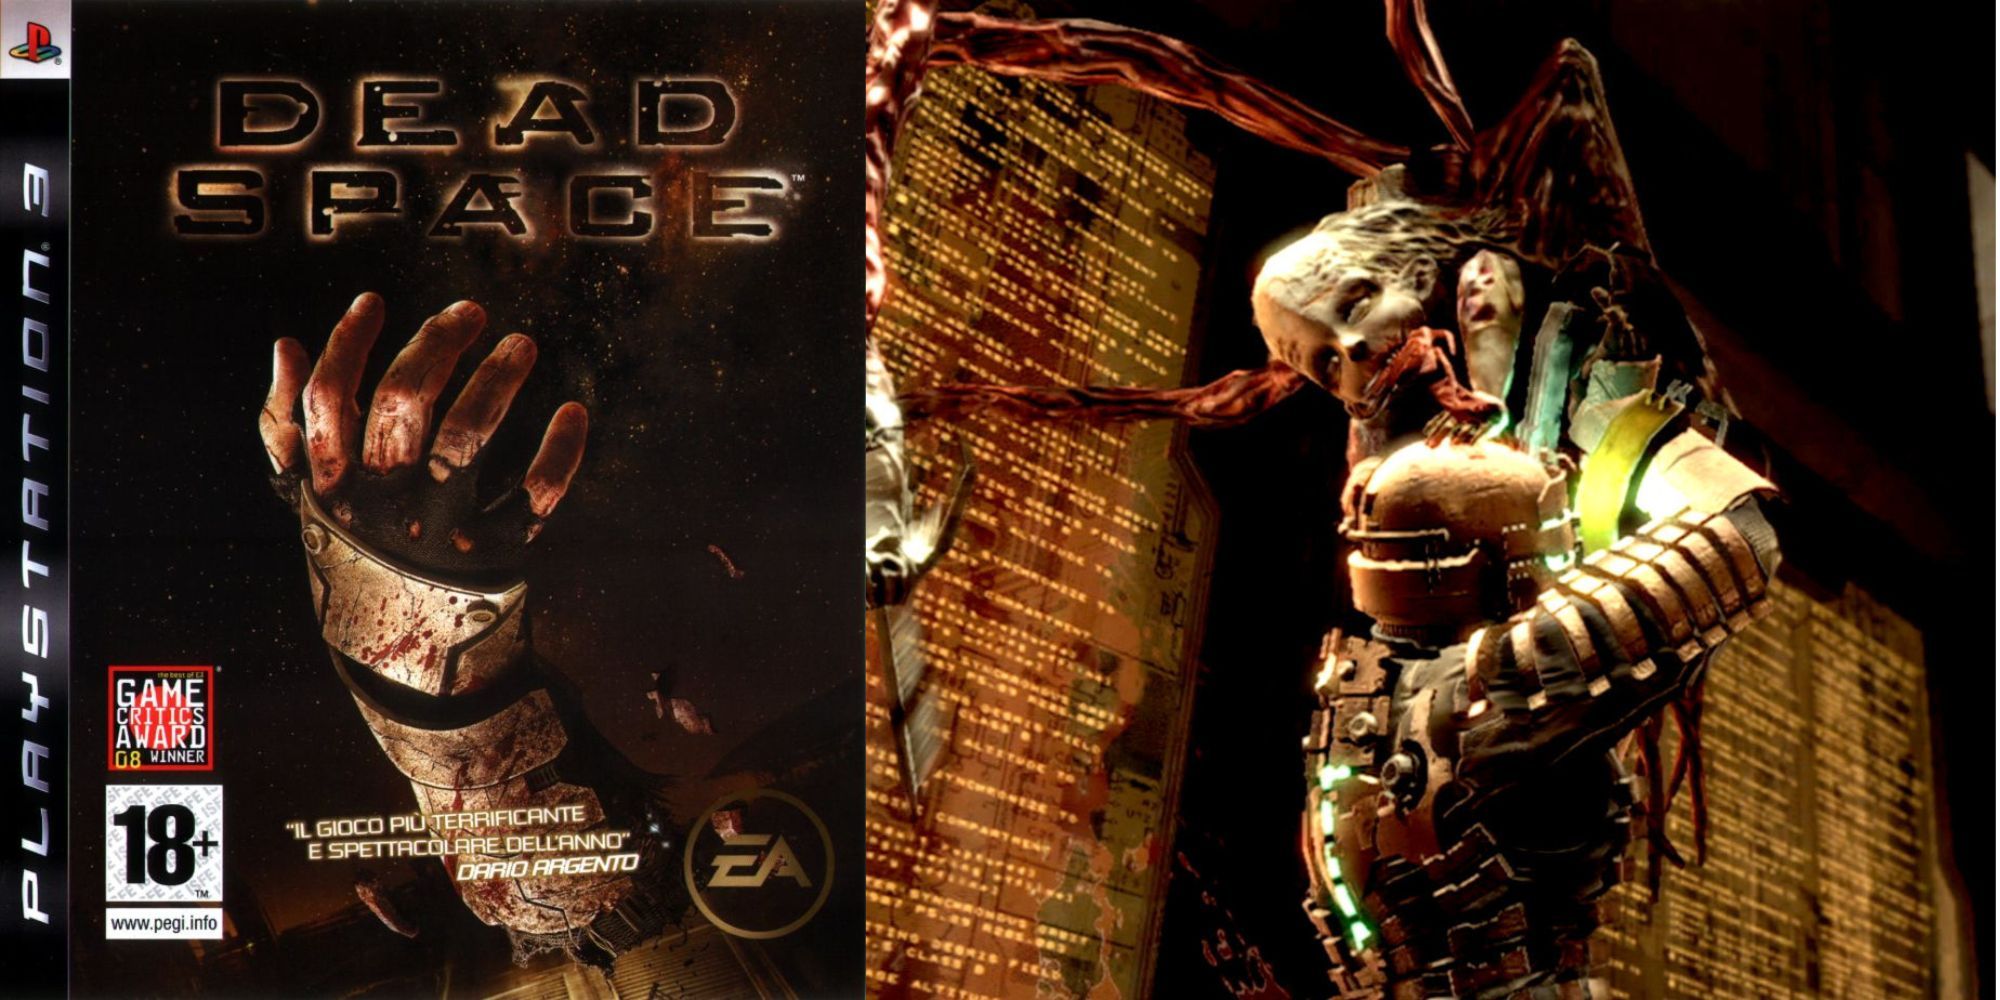 Dead Space cover art and in-game monster